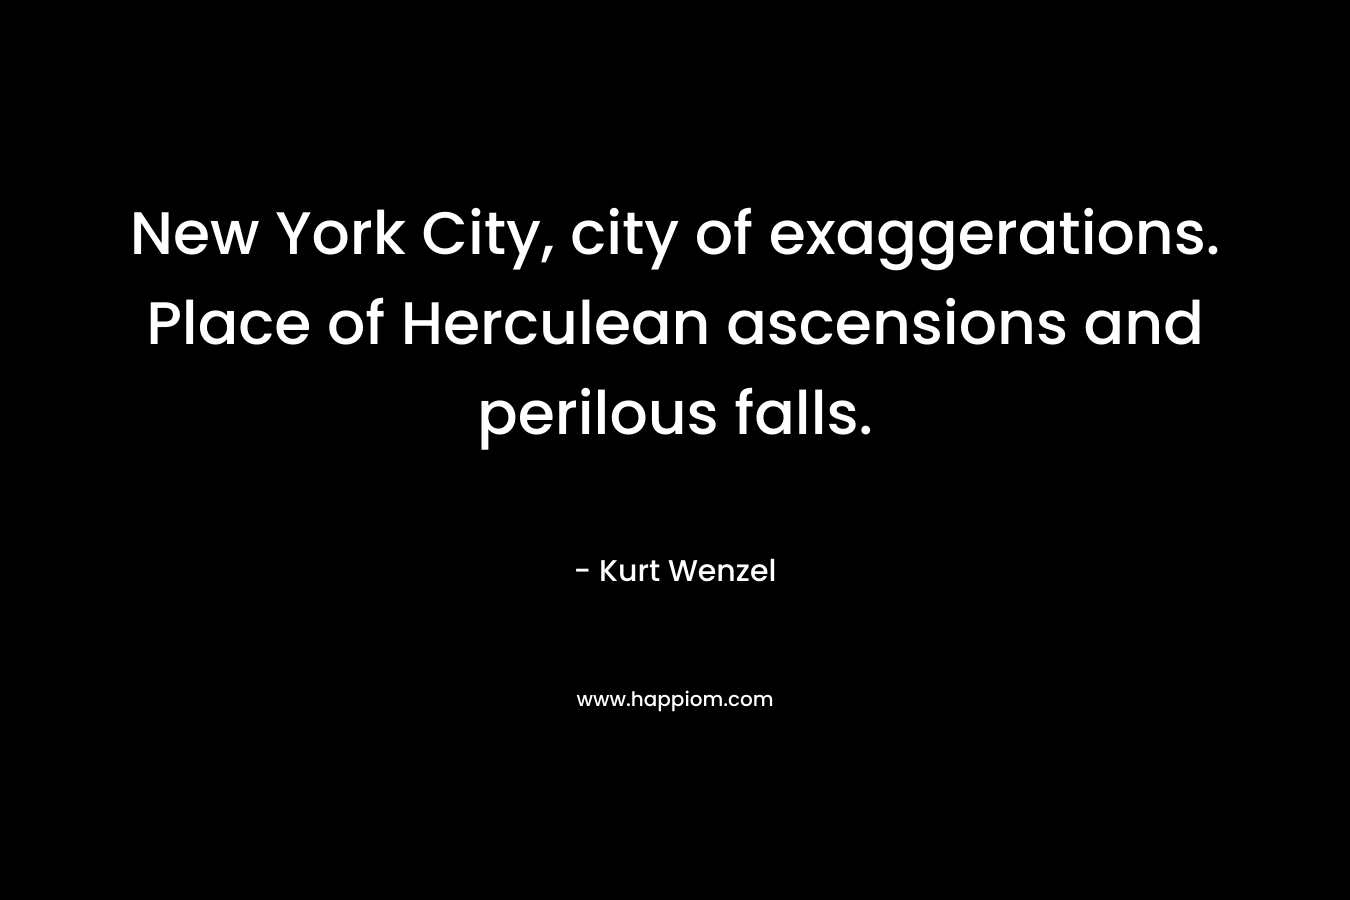 New York City, city of exaggerations. Place of Herculean ascensions and perilous falls. – Kurt Wenzel